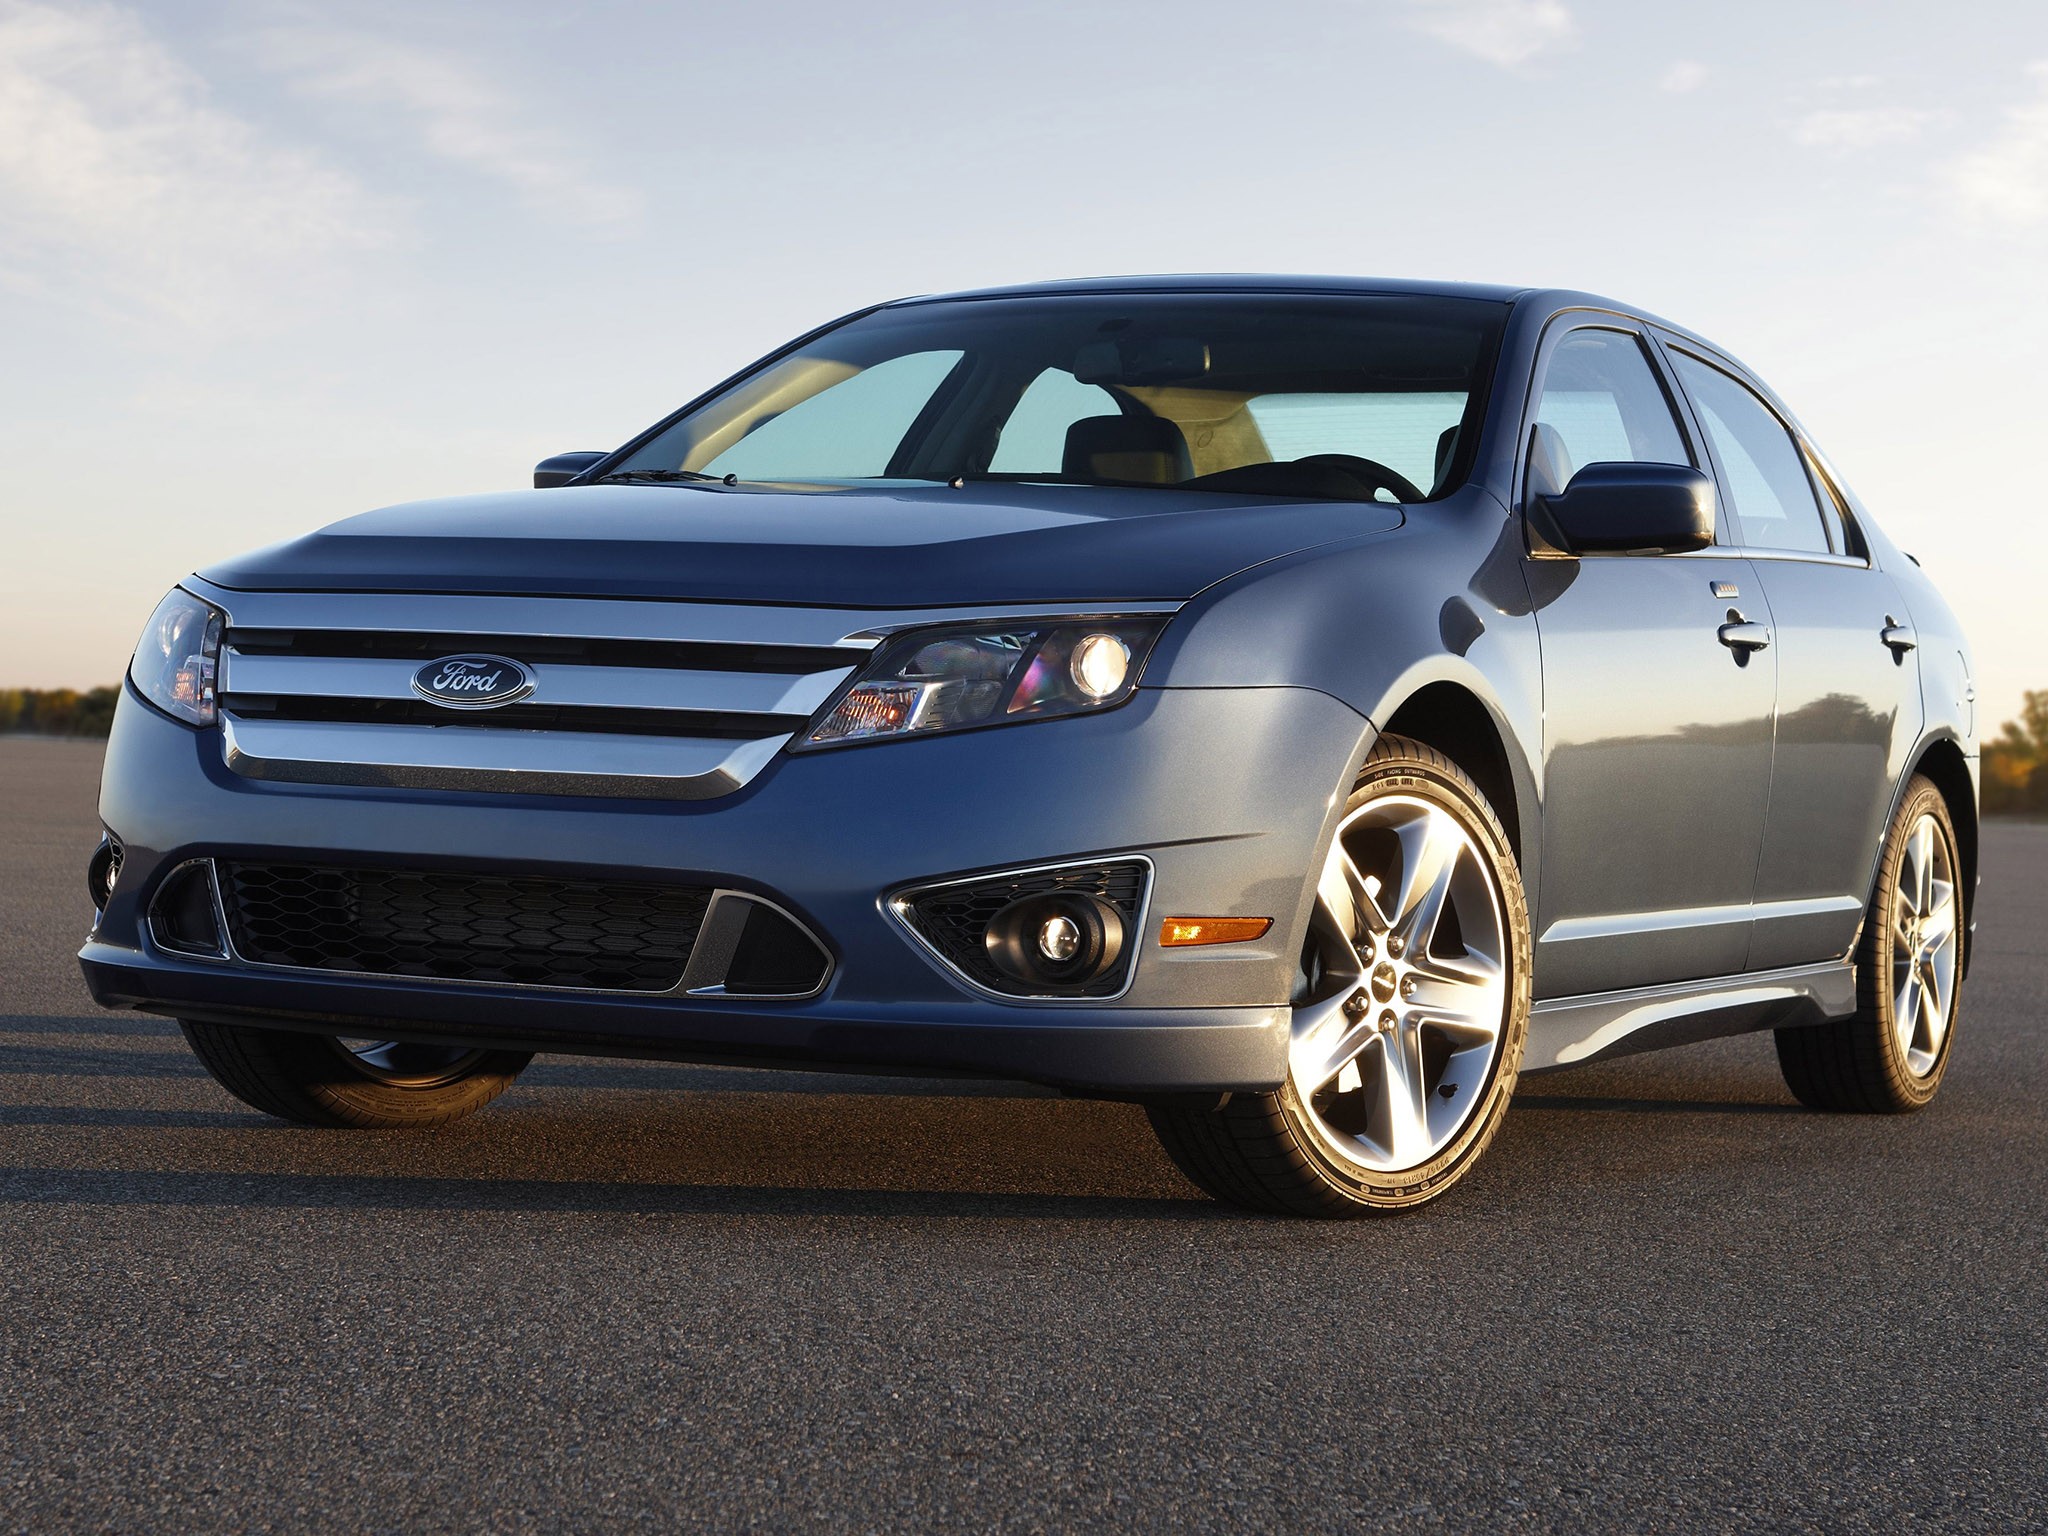 2010 Ford fusion ground clearance #9